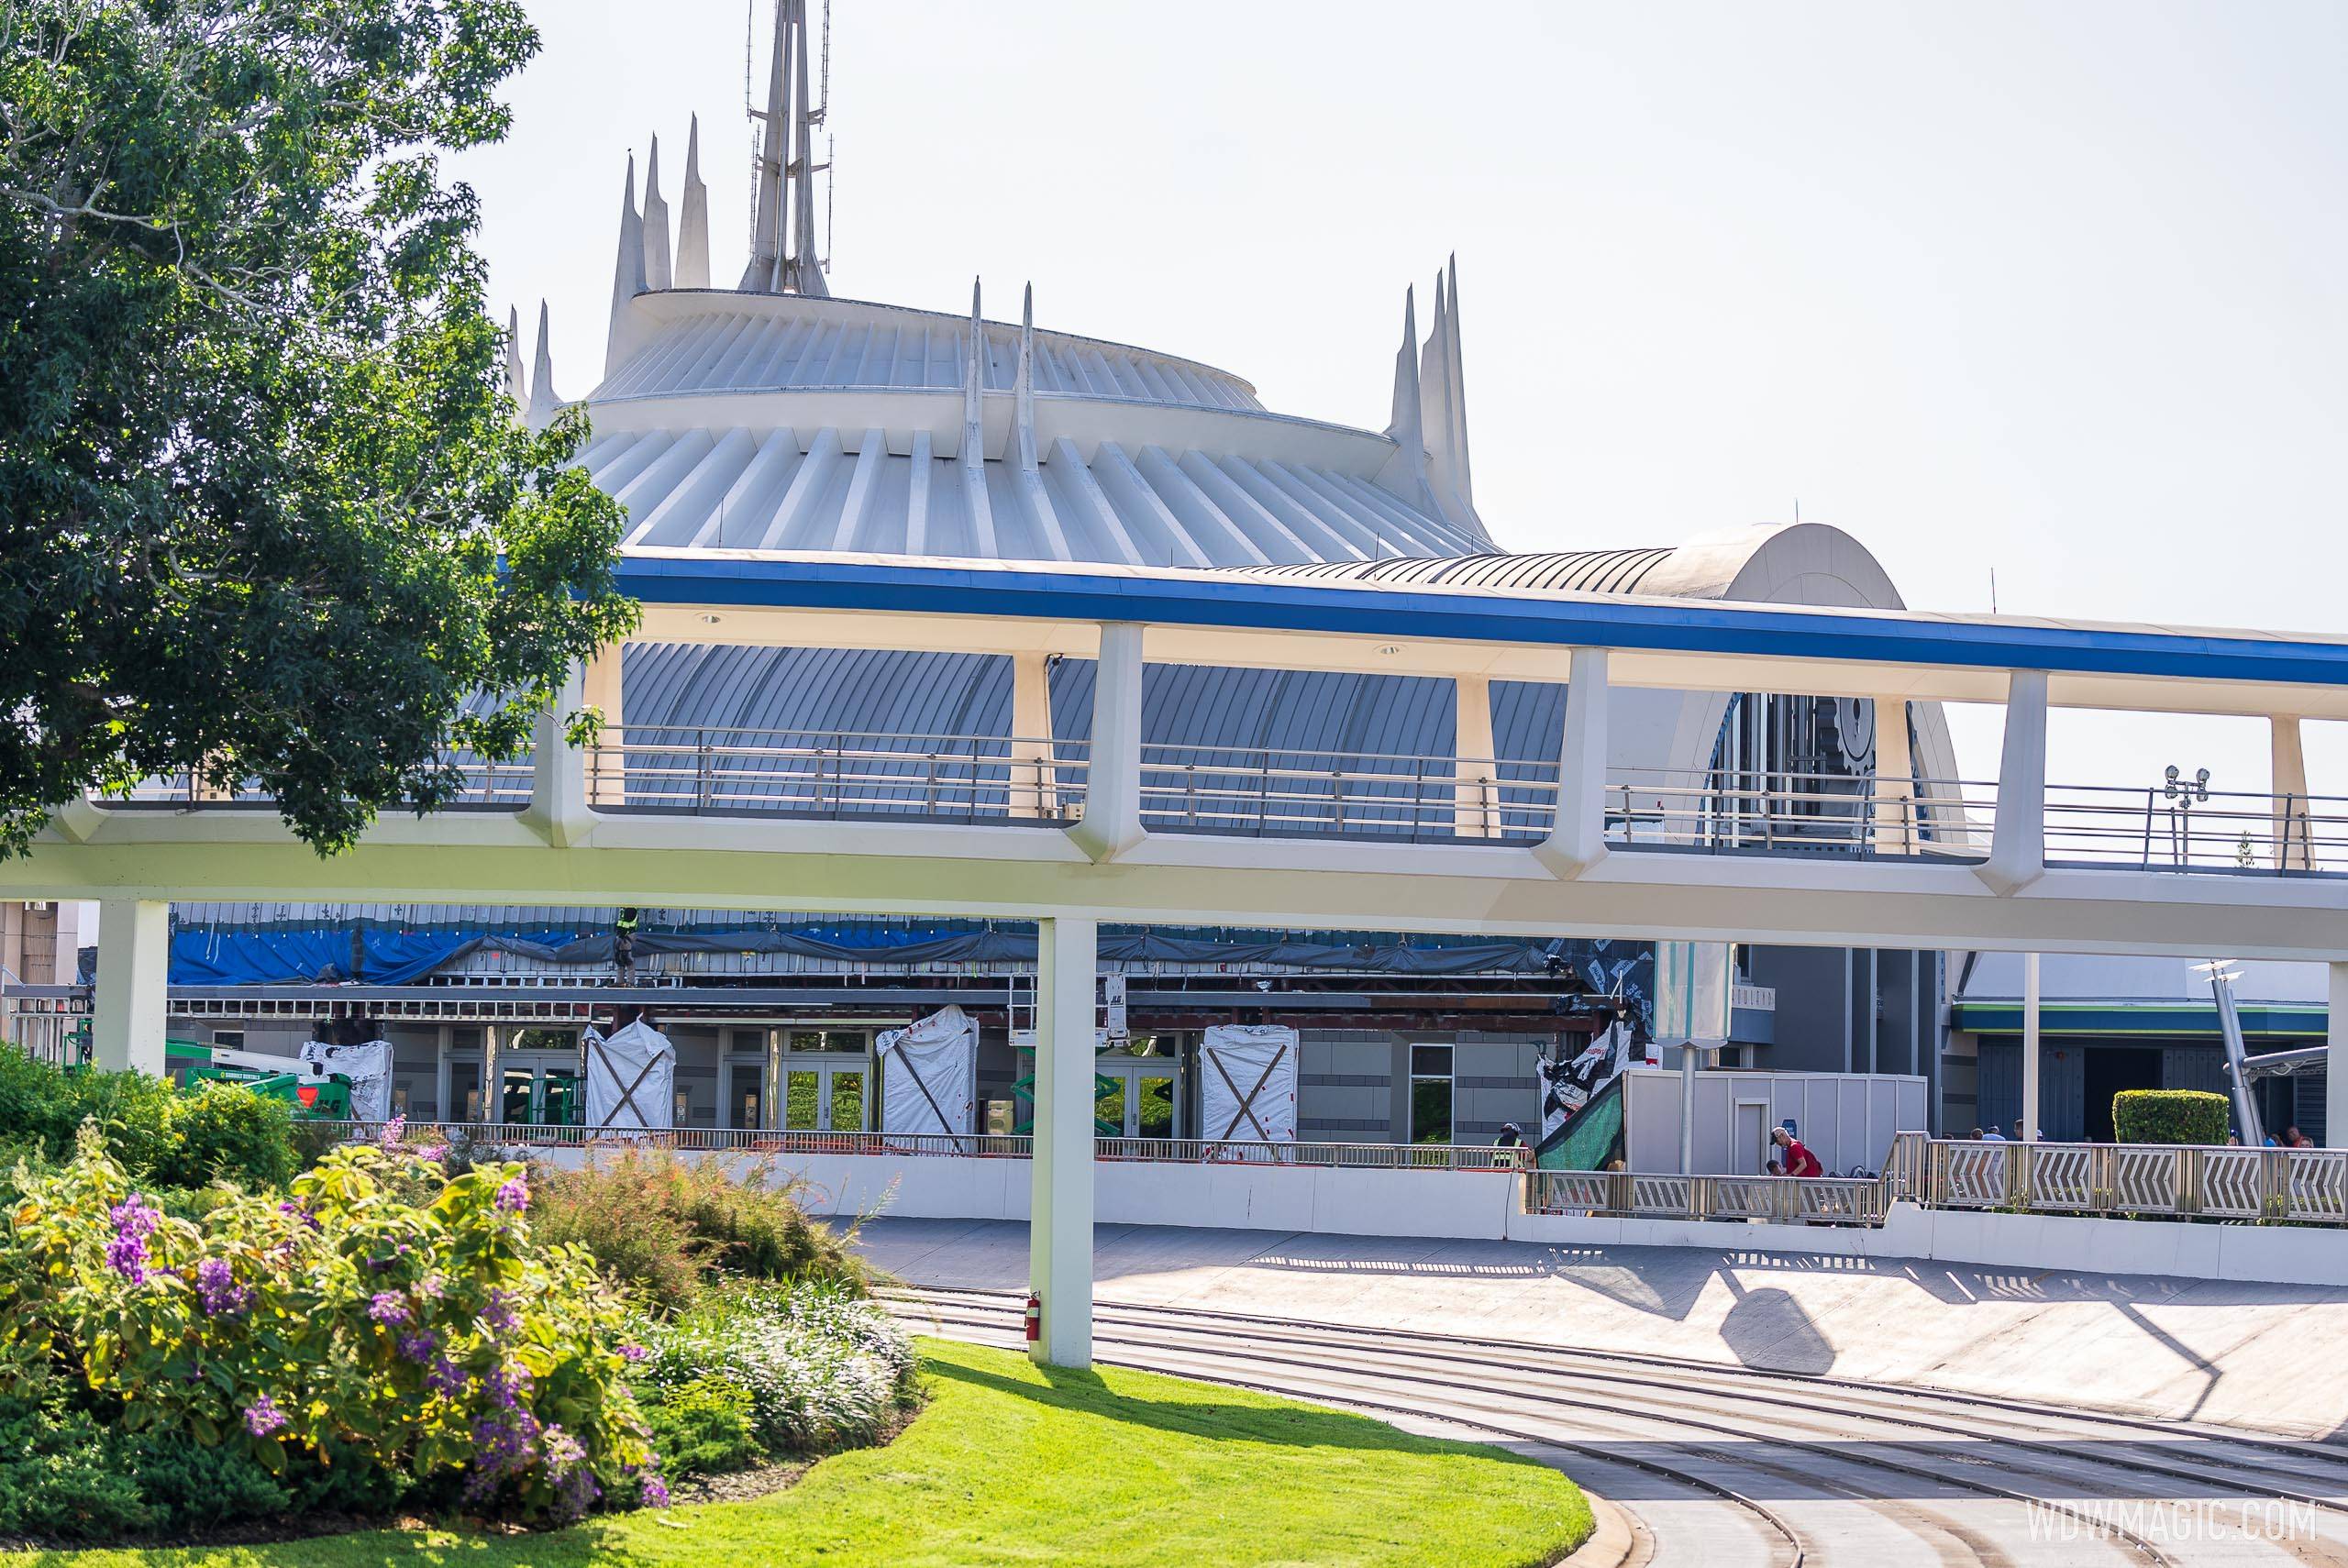 Tomorrowland Light and Power Co exterior changes - July 20 2022